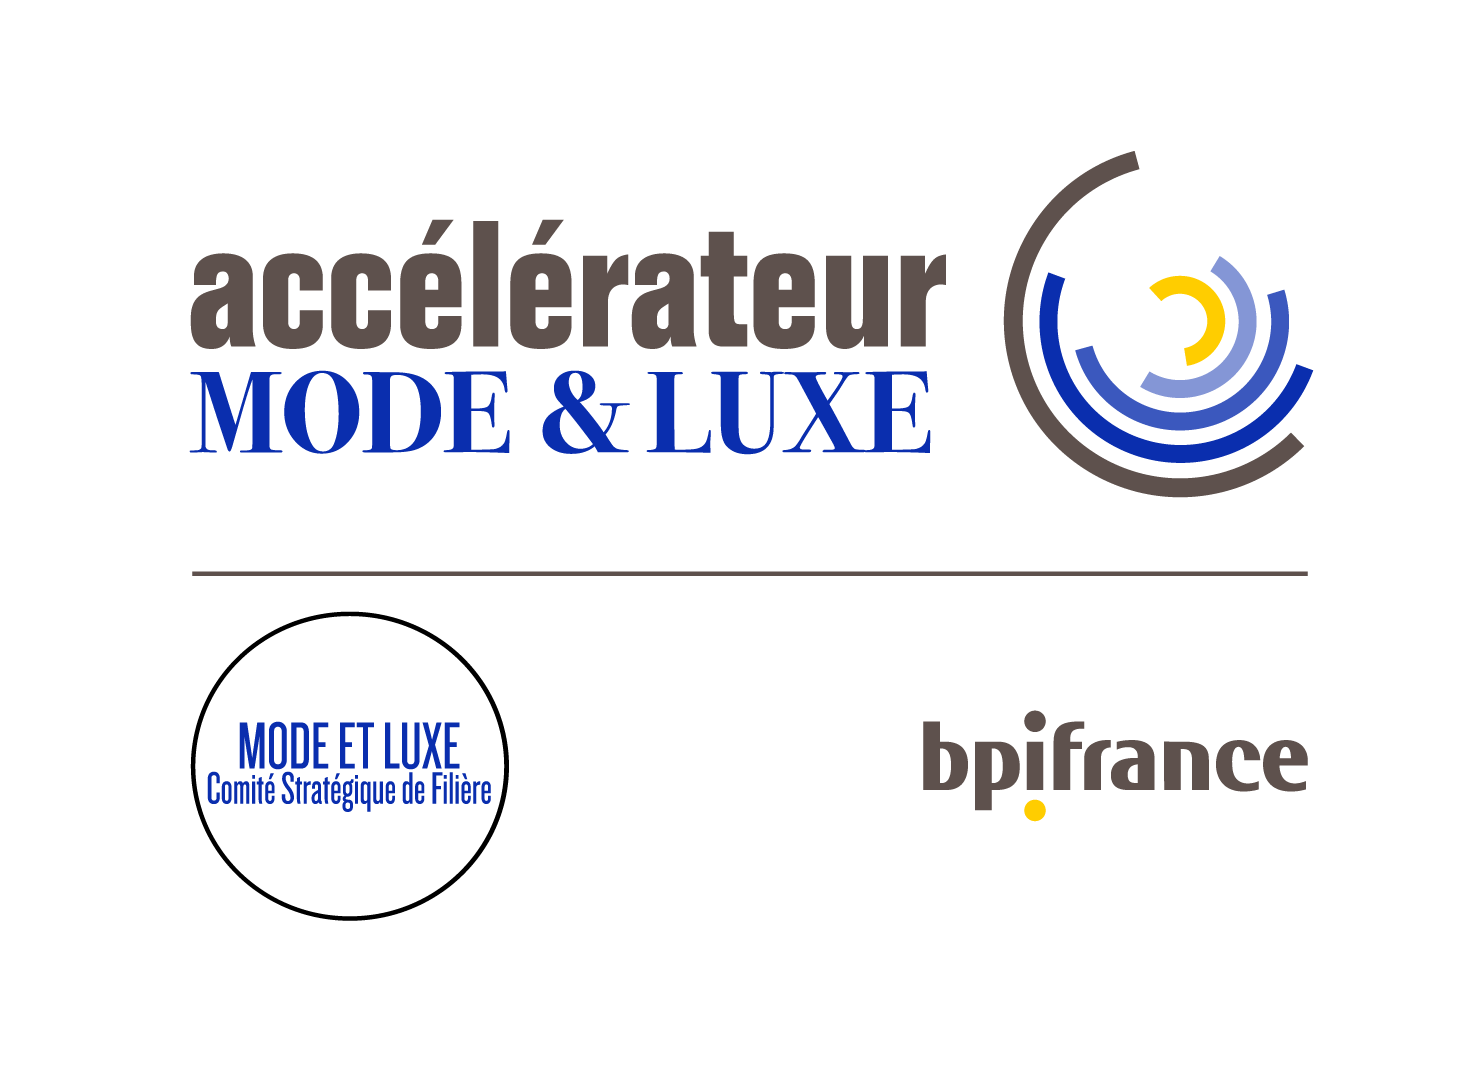 https://www.la-frenchtouch.fr/storage/sites/4/2021/06/Logo-ACC-MODE-ET-LUXE_RVB_COMPACT_FD-CLAIR.png